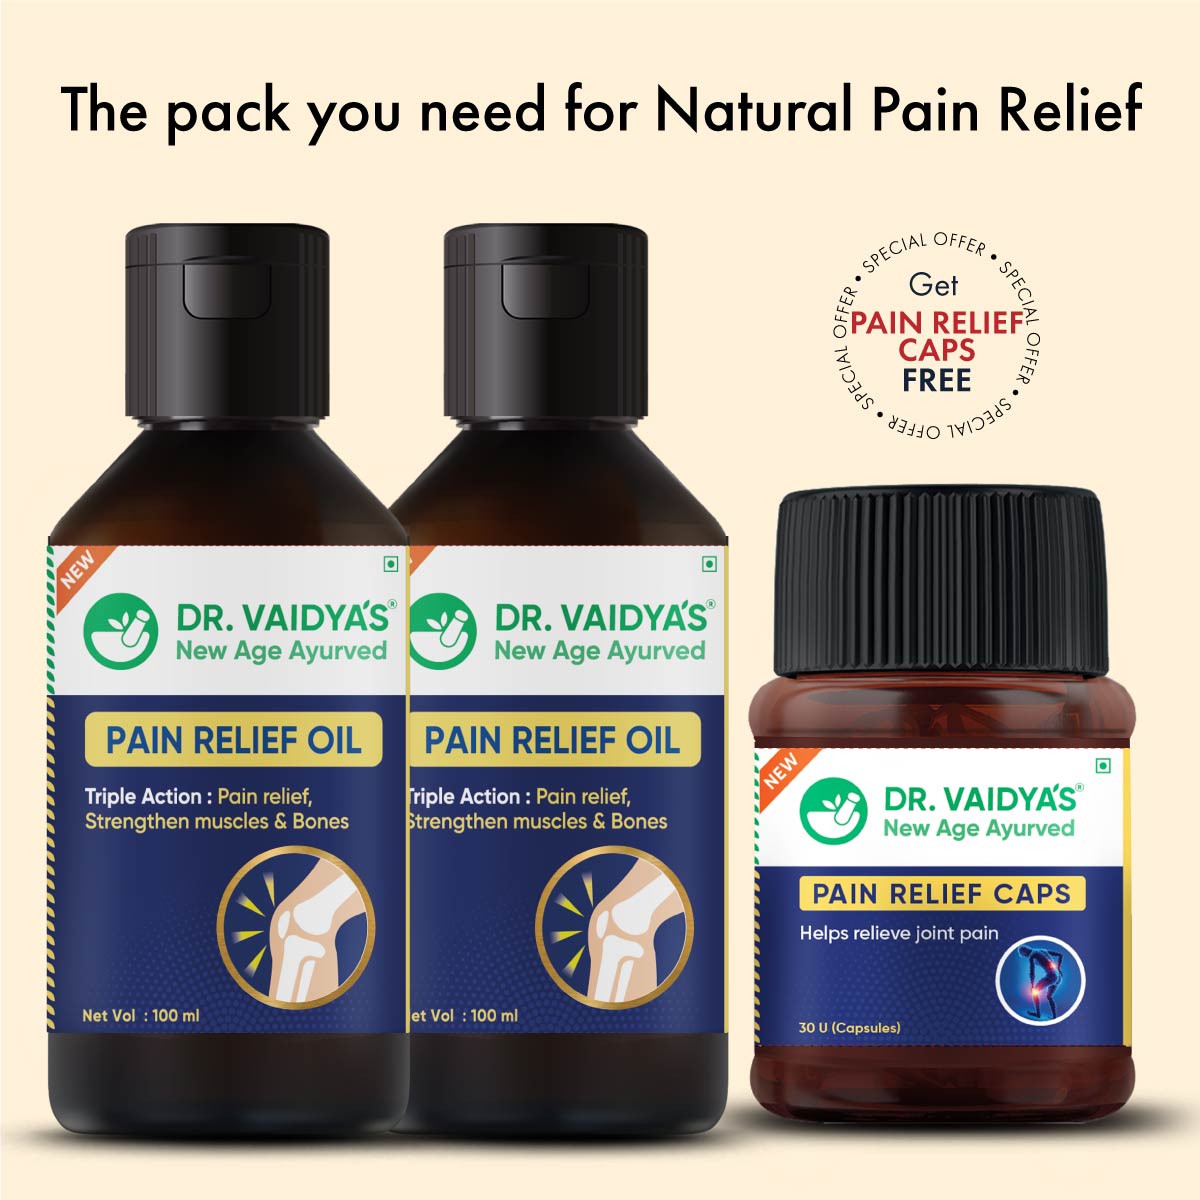 Dr. Vaidya's Pack of 2 Pain Relief Oil with Free Pain Relief Capsule